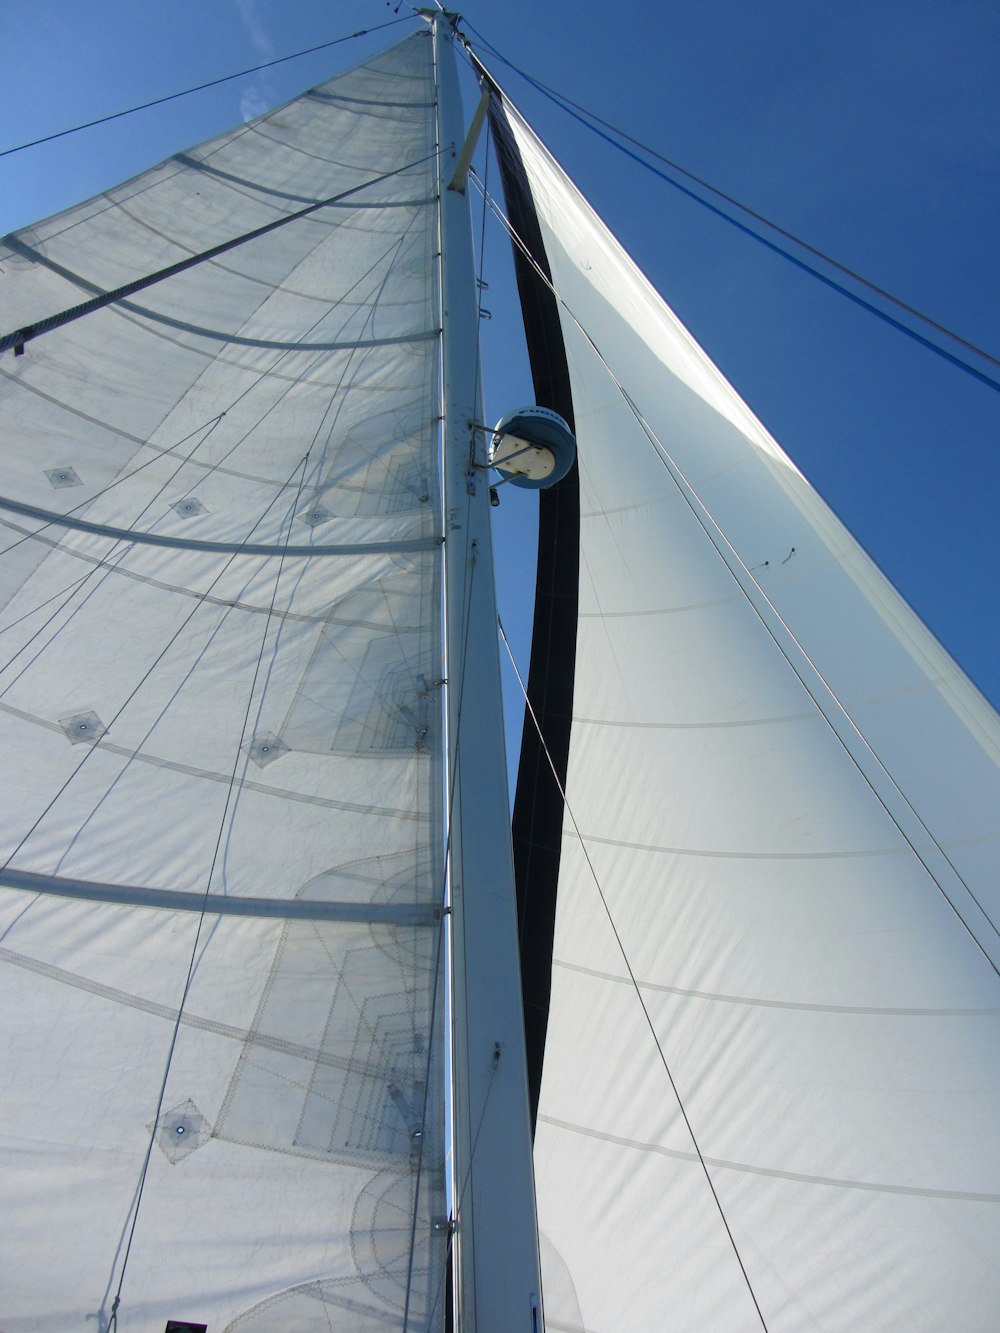 a sailboat with a person on the deck